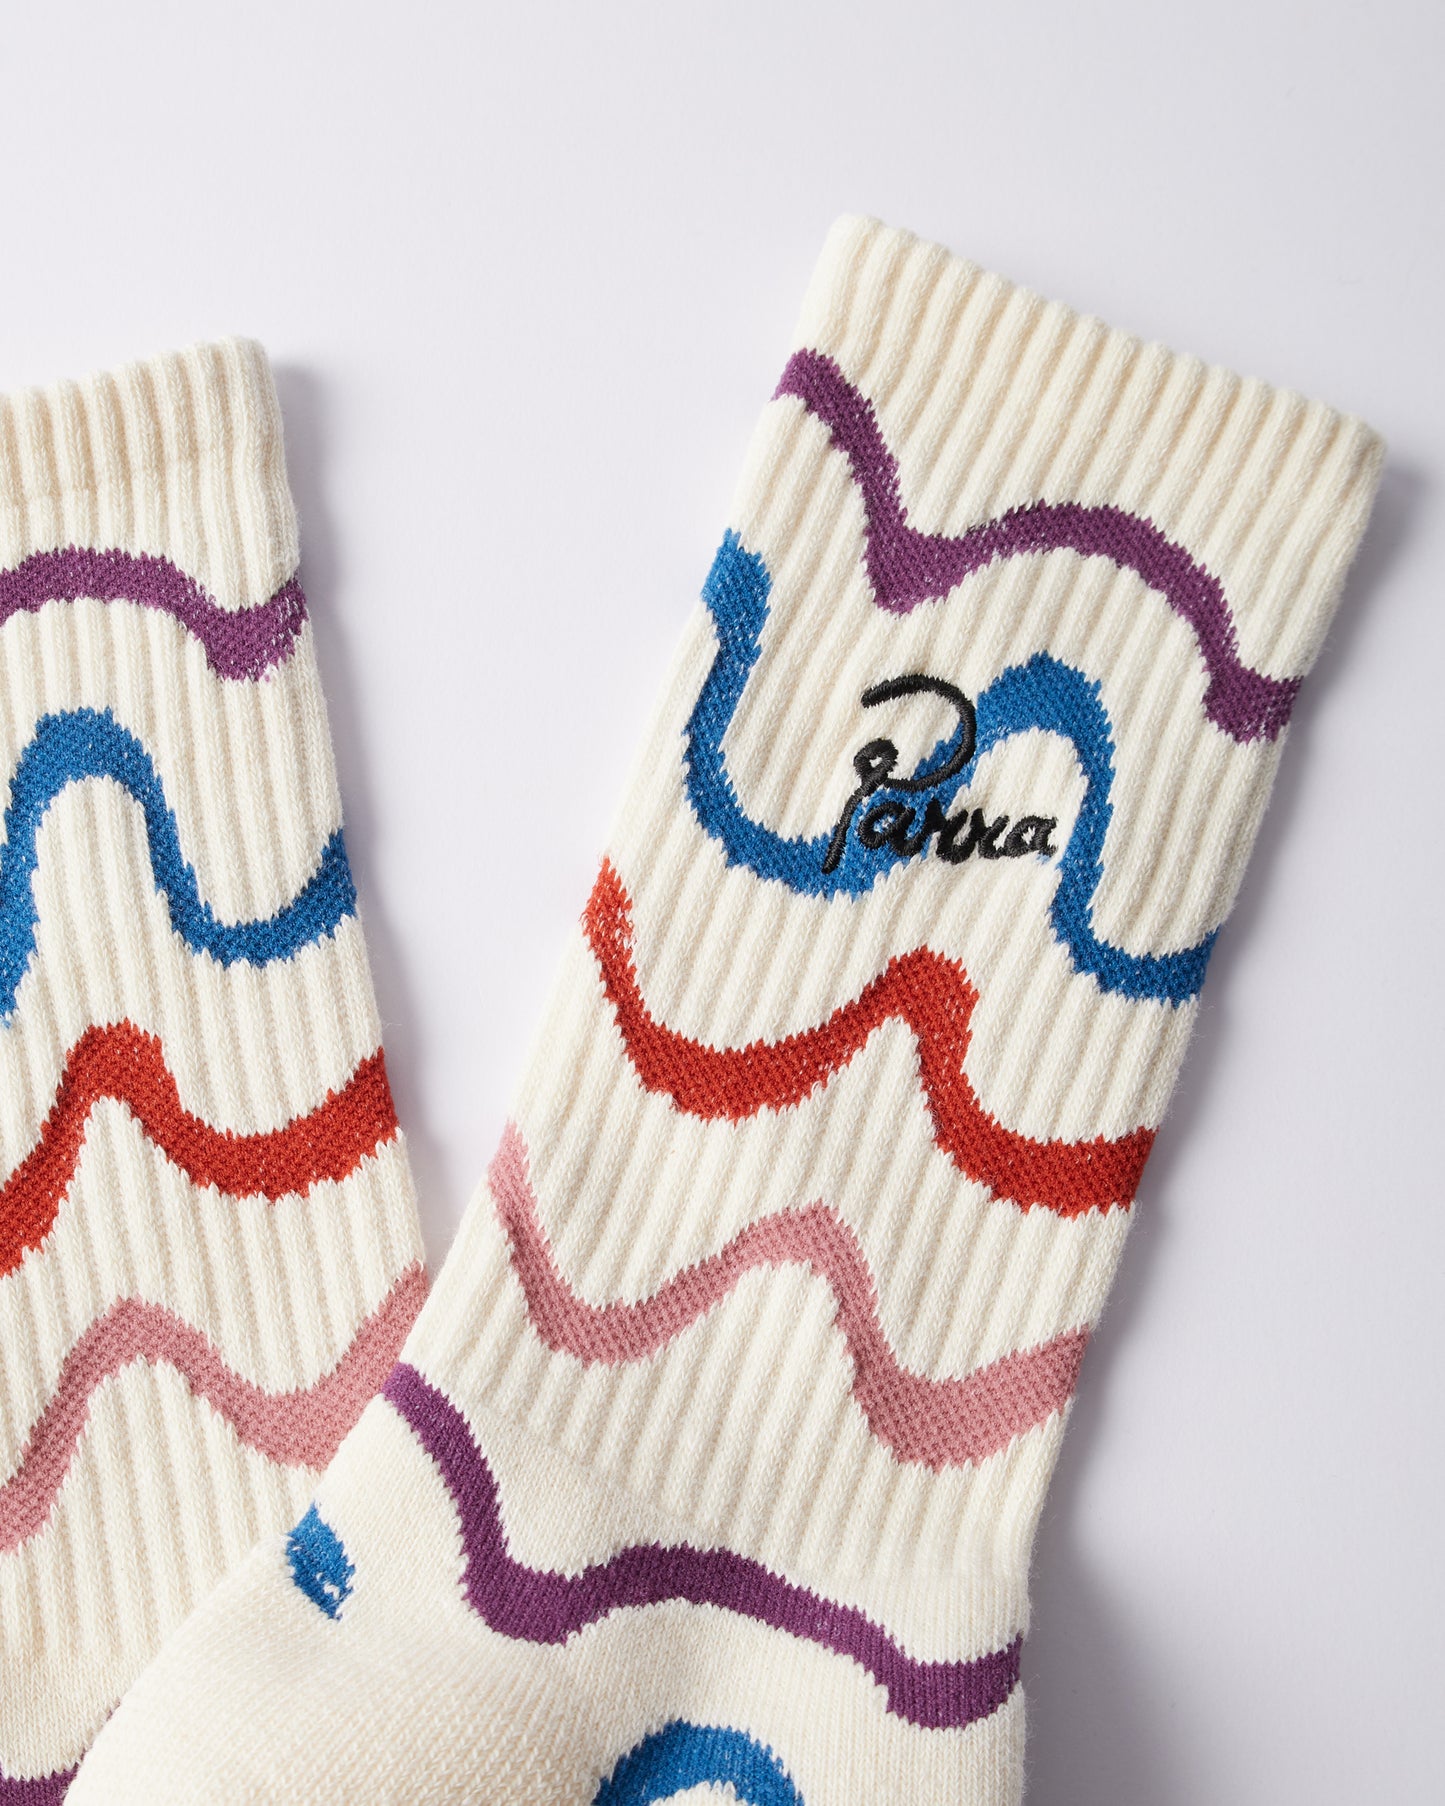 By Parra Sock Wave Crew Socks Off White